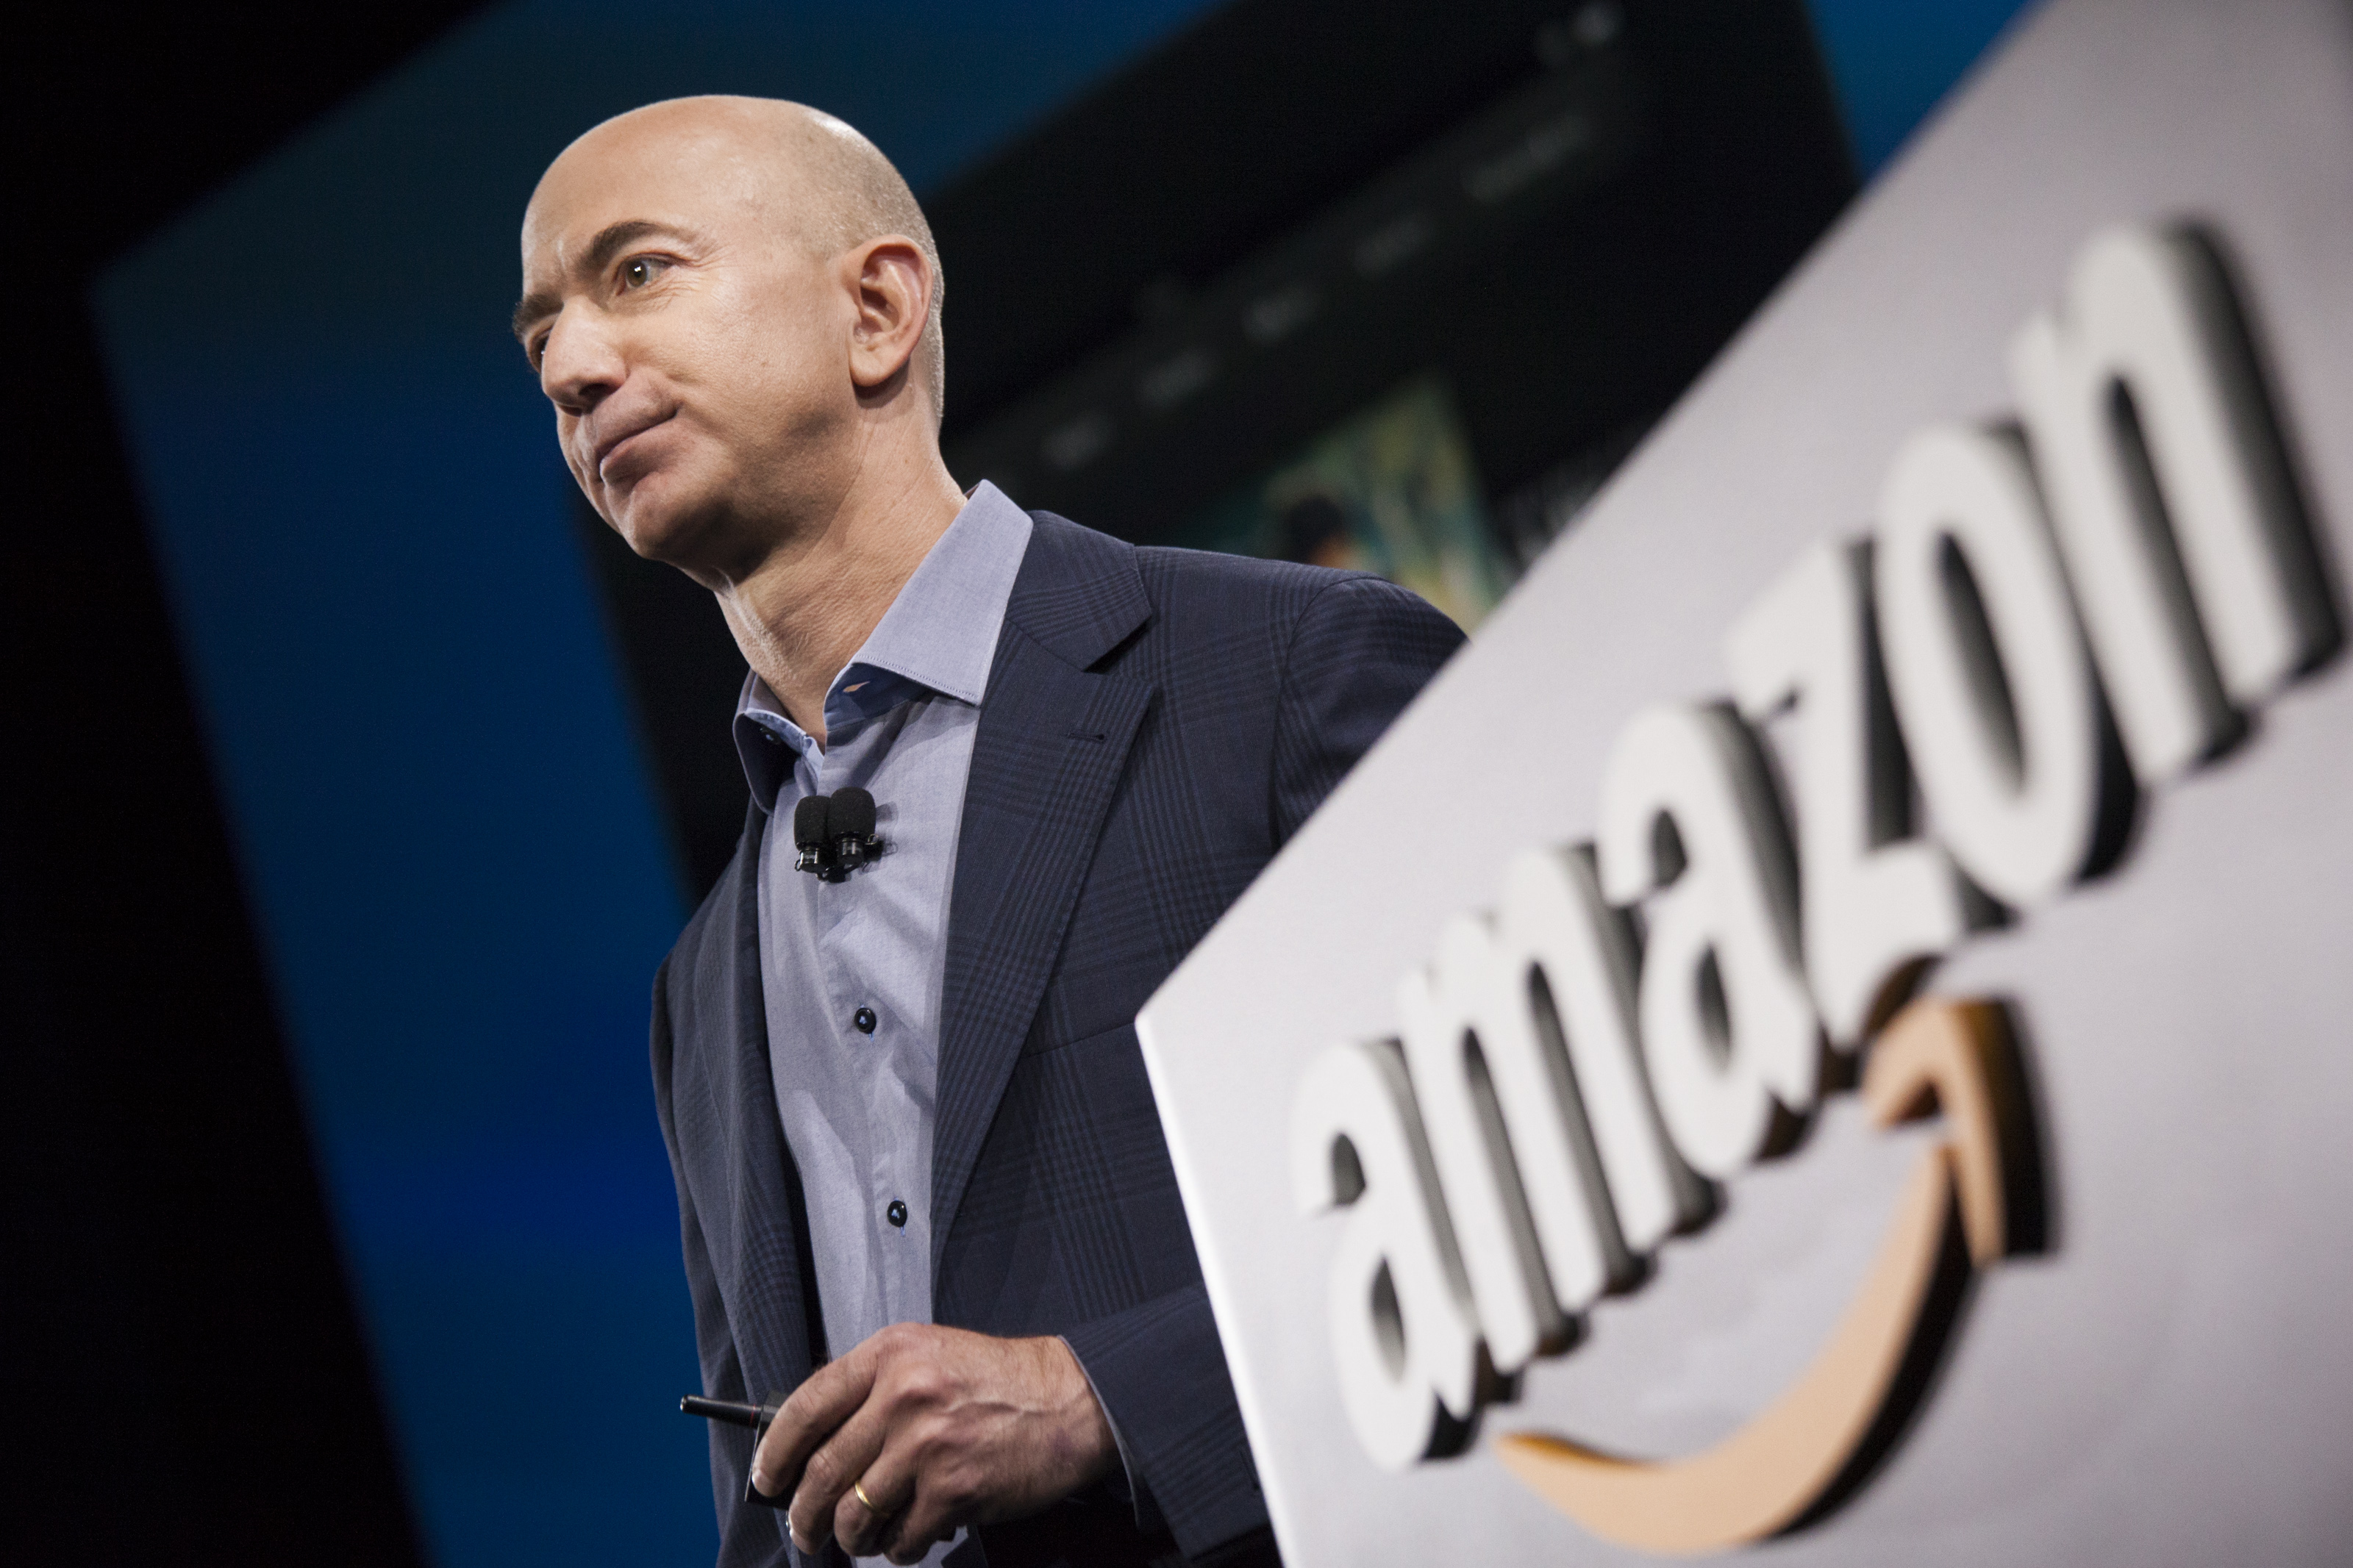 Amazon.com founder and CEO Jeff Bezos presents the company's first smartphone, the Fire Phone, in Seattle, on June 18, 2014. (David Ryder—Getty Images)